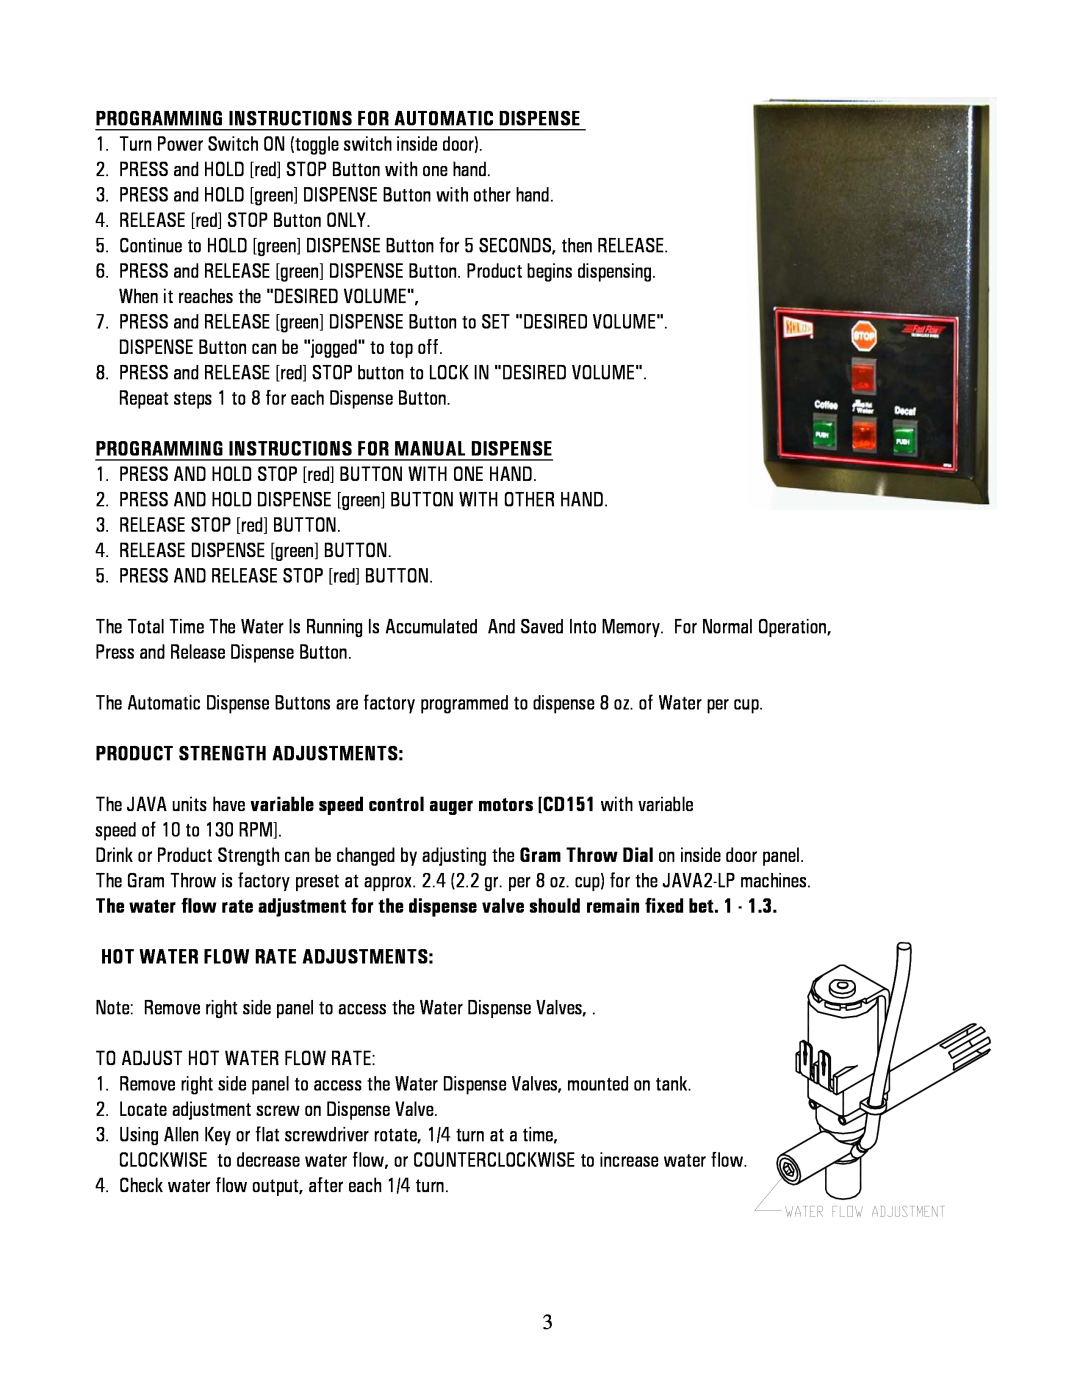 Cecilware JAVA2-LP Programming Instructions For Automatic Dispense, Programming Instructions For Manual Dispense 